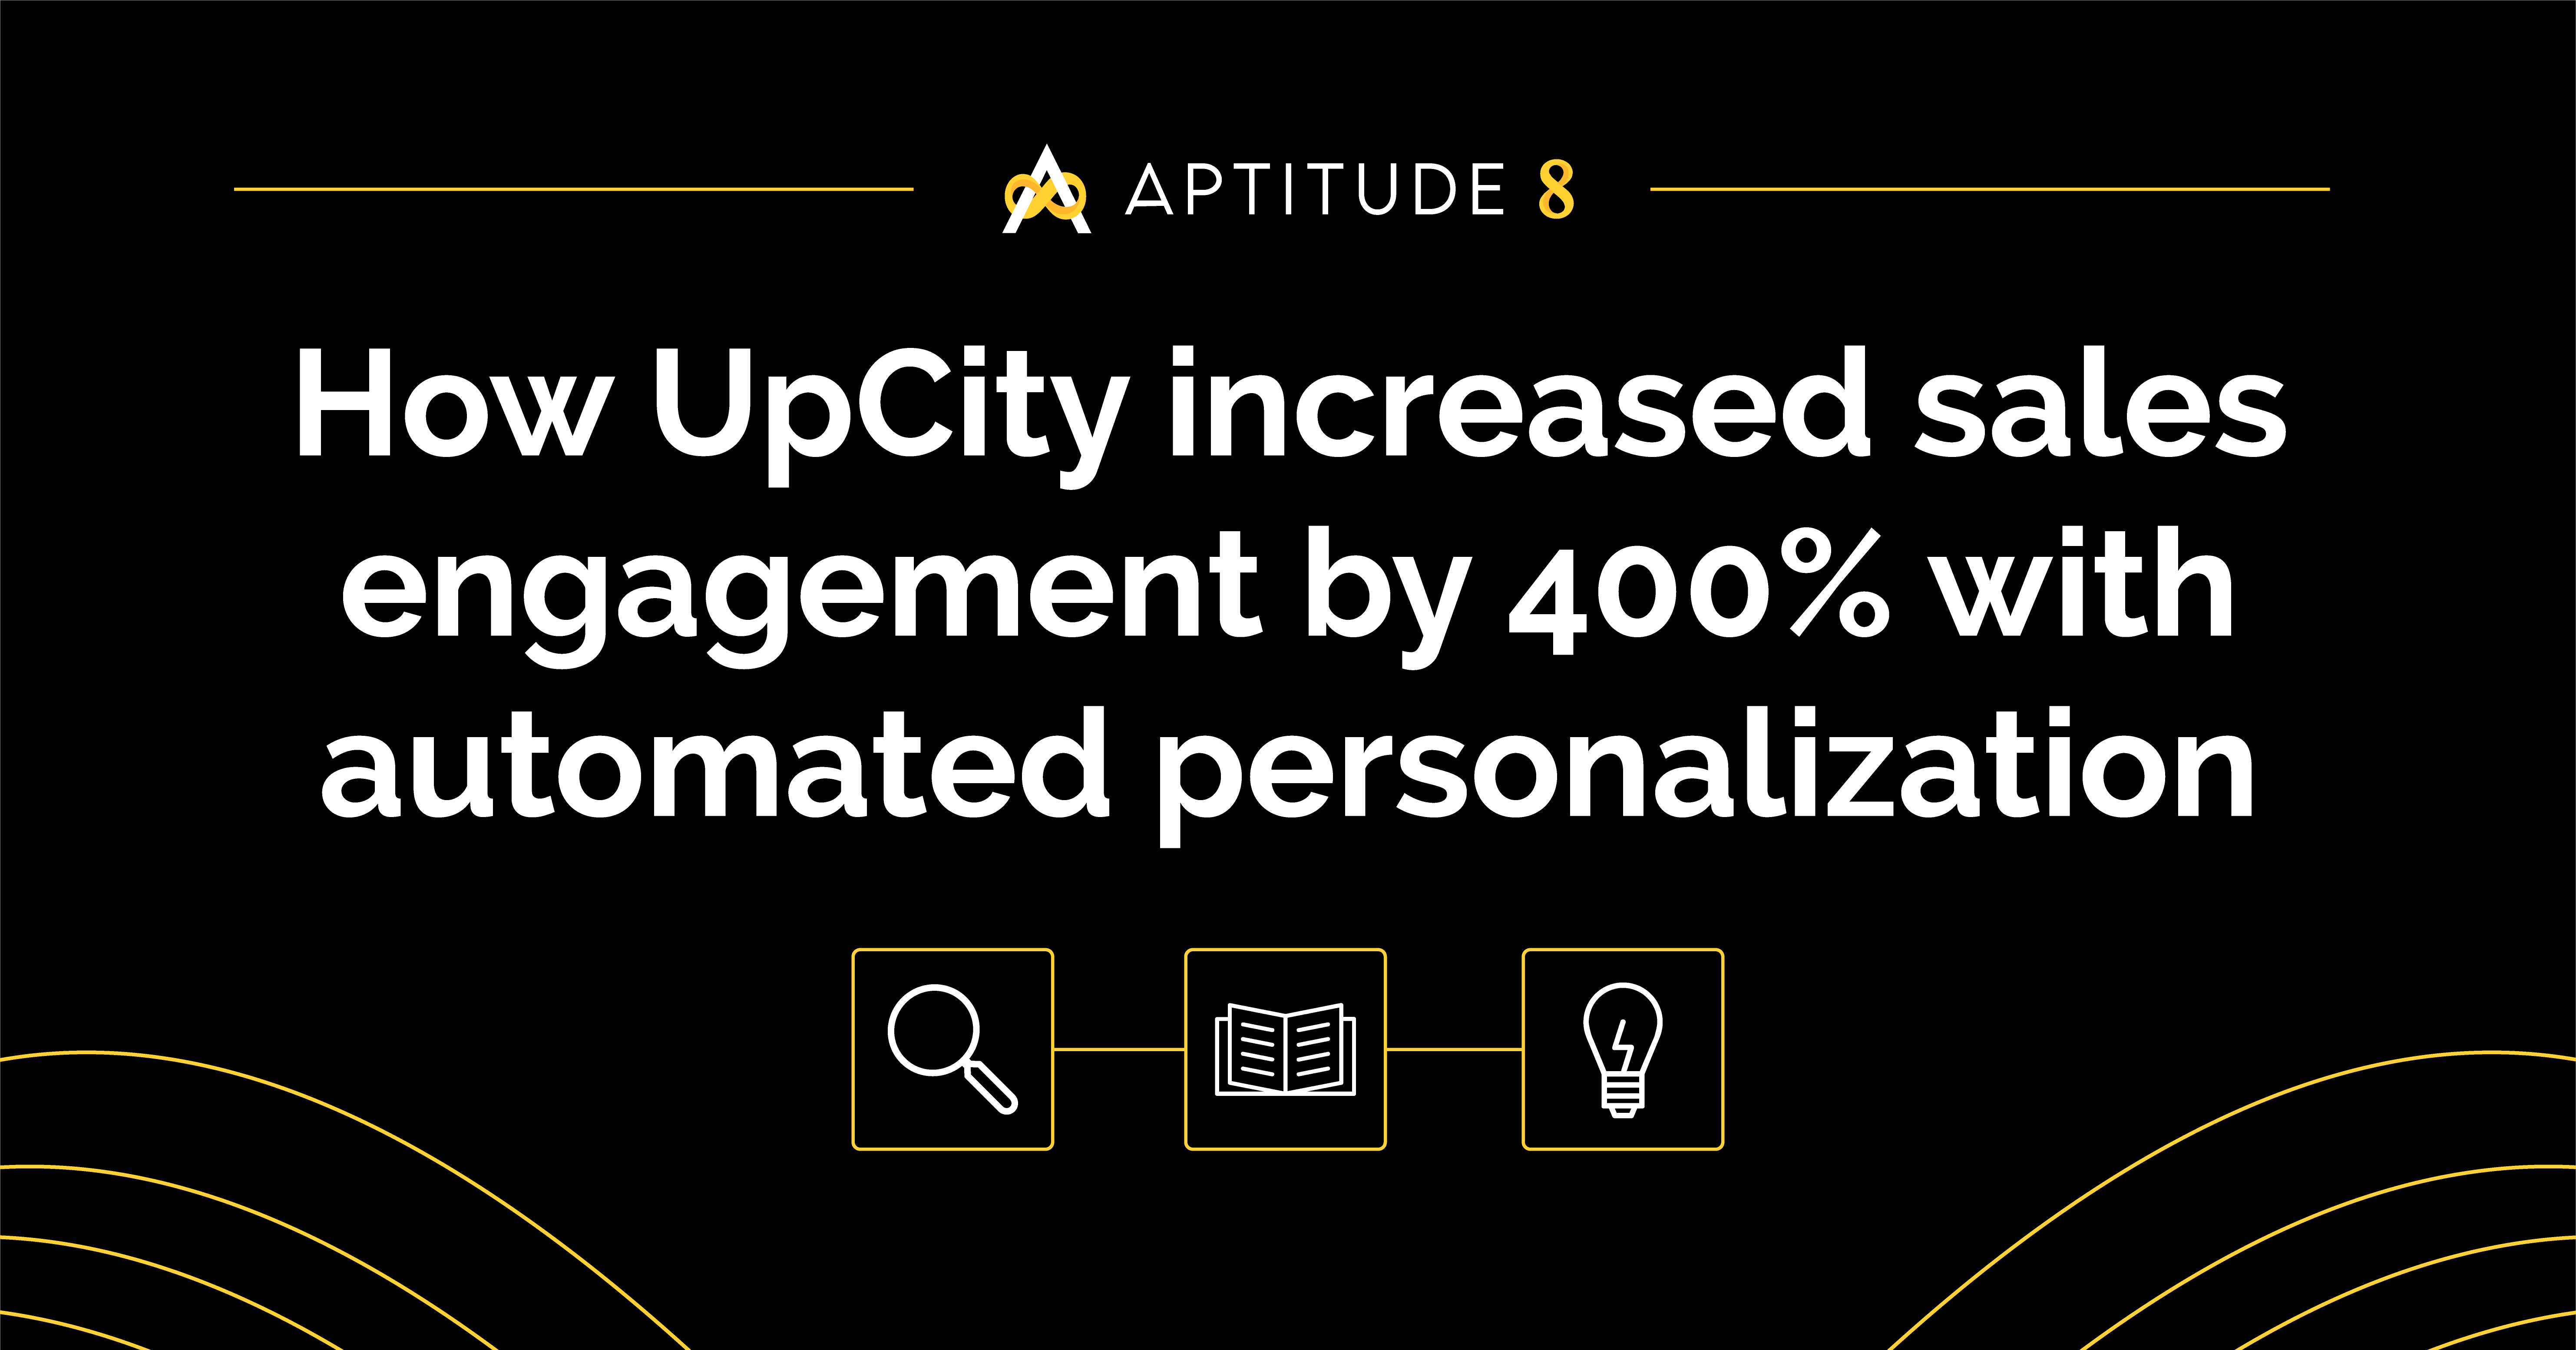 How UpCity increased sales engagement by 400% with automated personalization